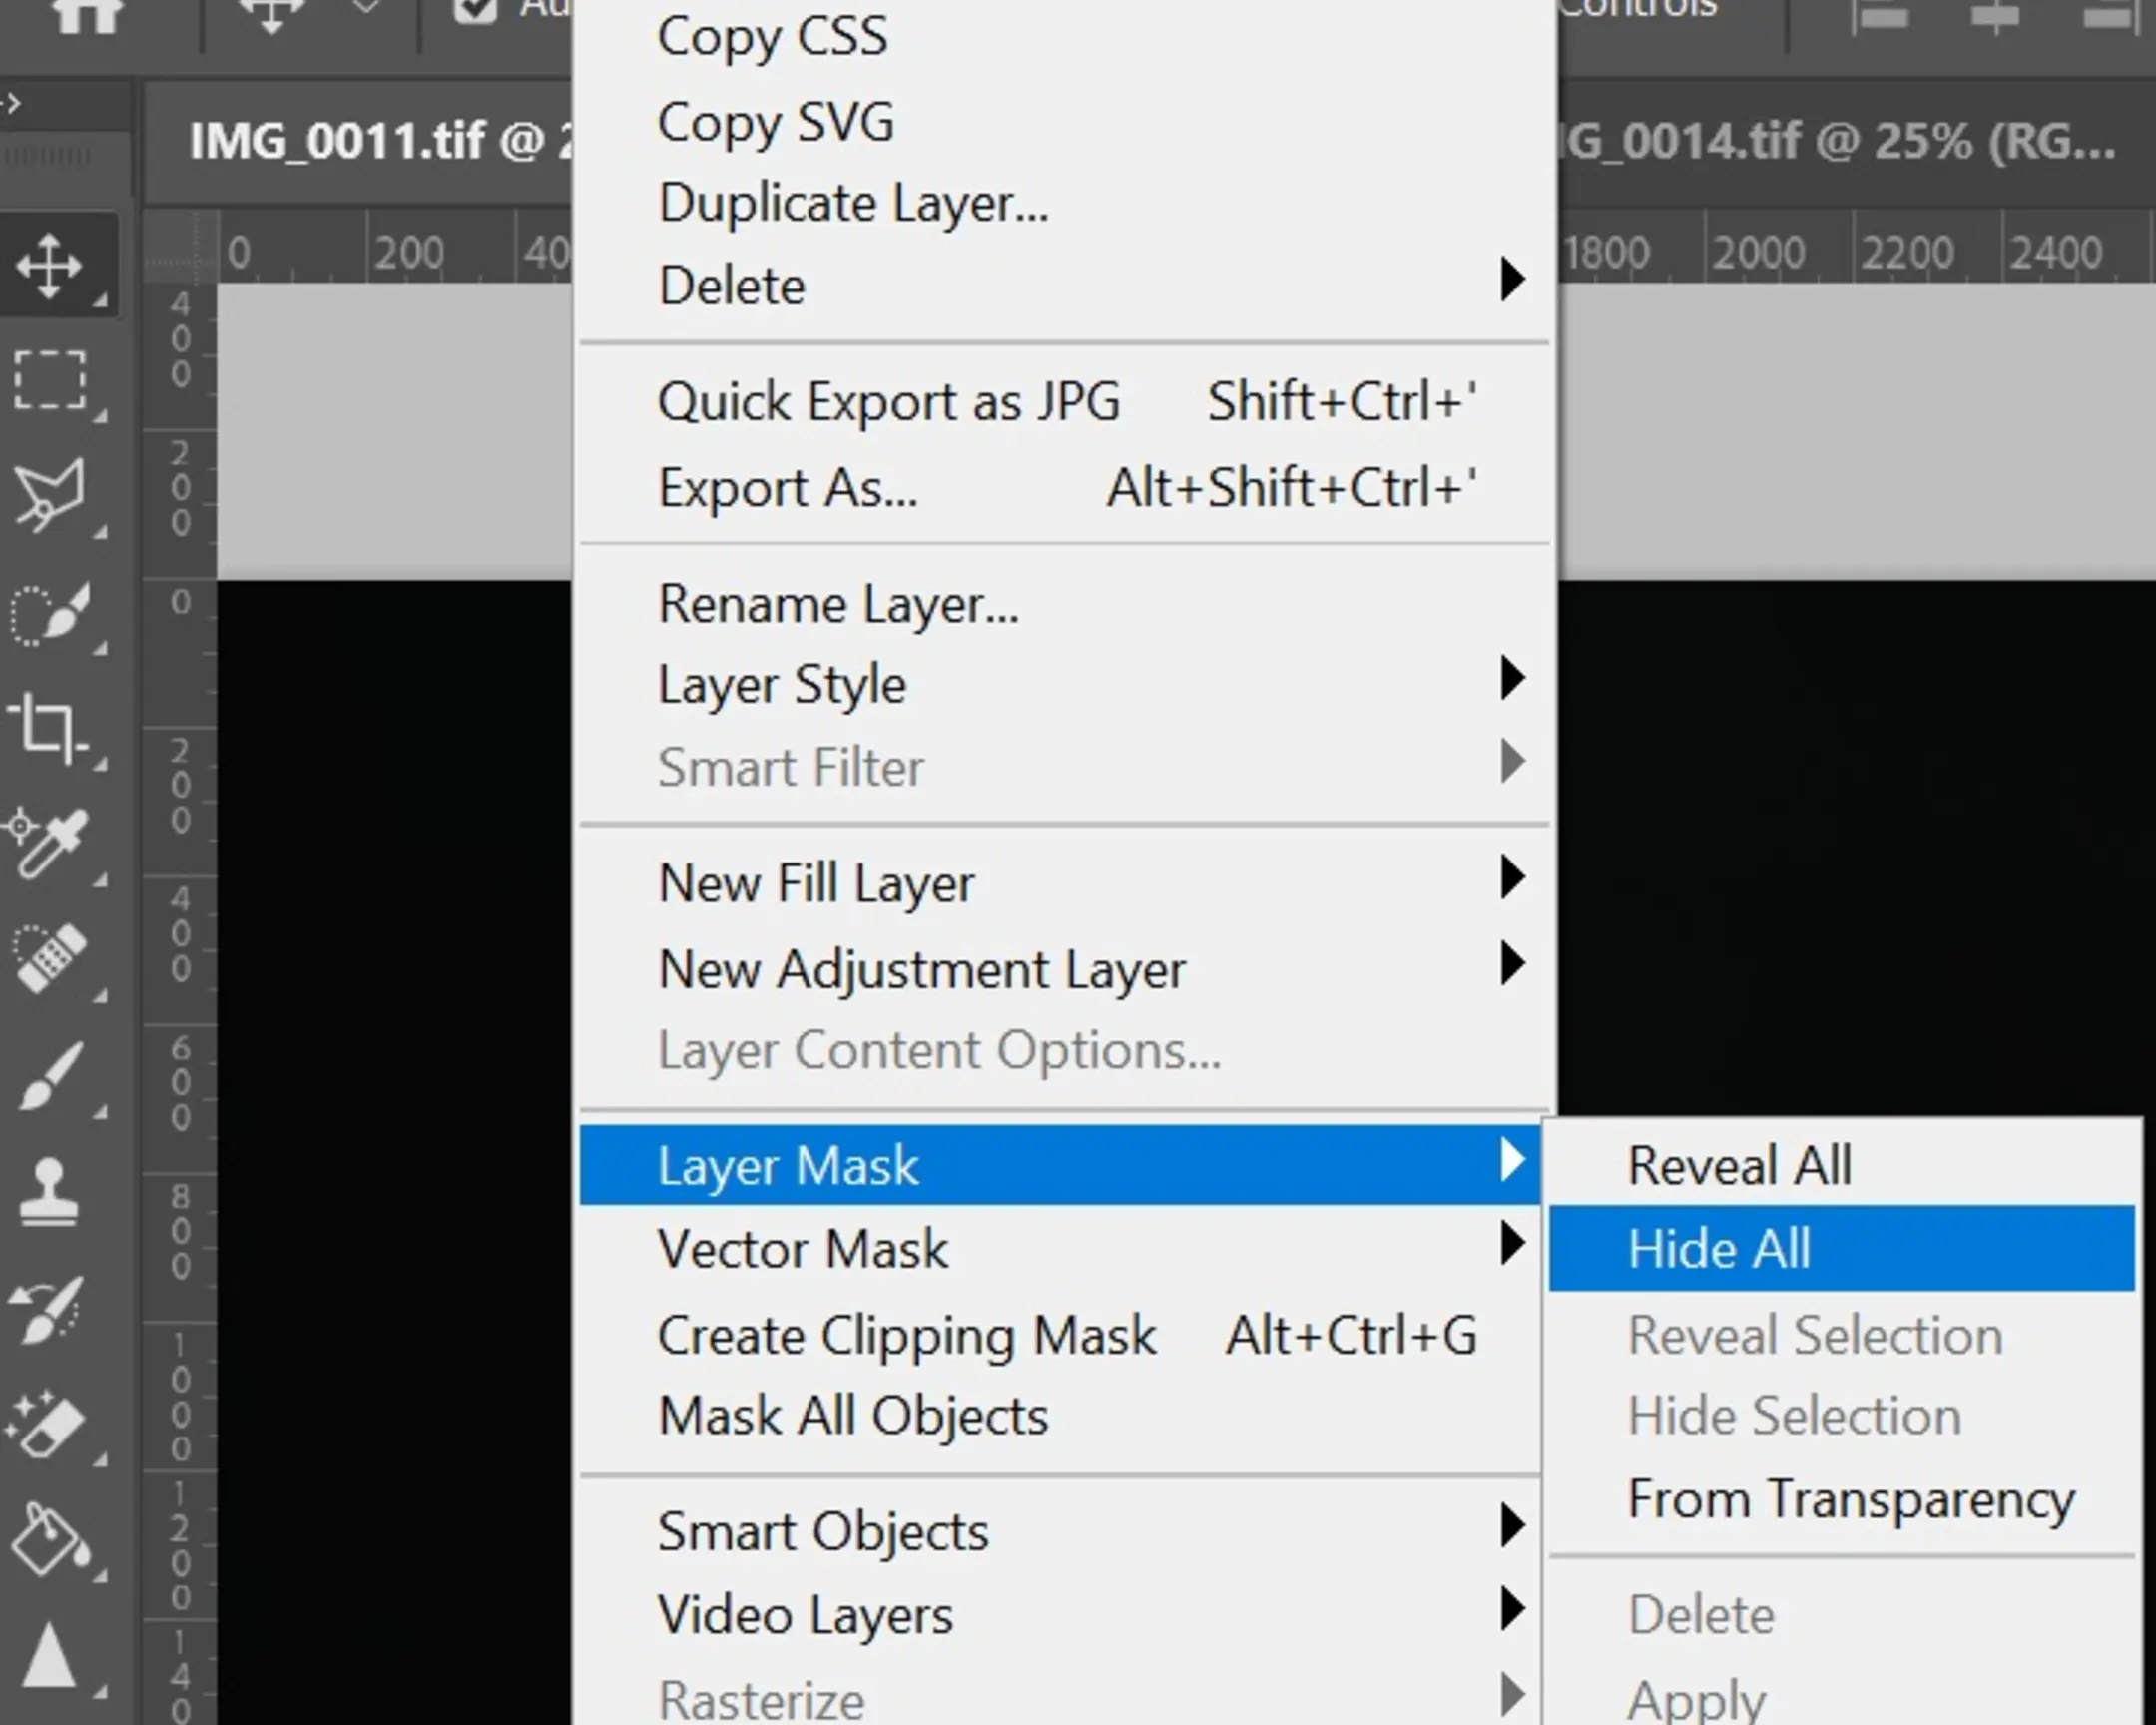 Photoshop - Layer Mask - Hide All. The photo shows an alternative way to add a black mask to a layer in Photoshop through the main menu.